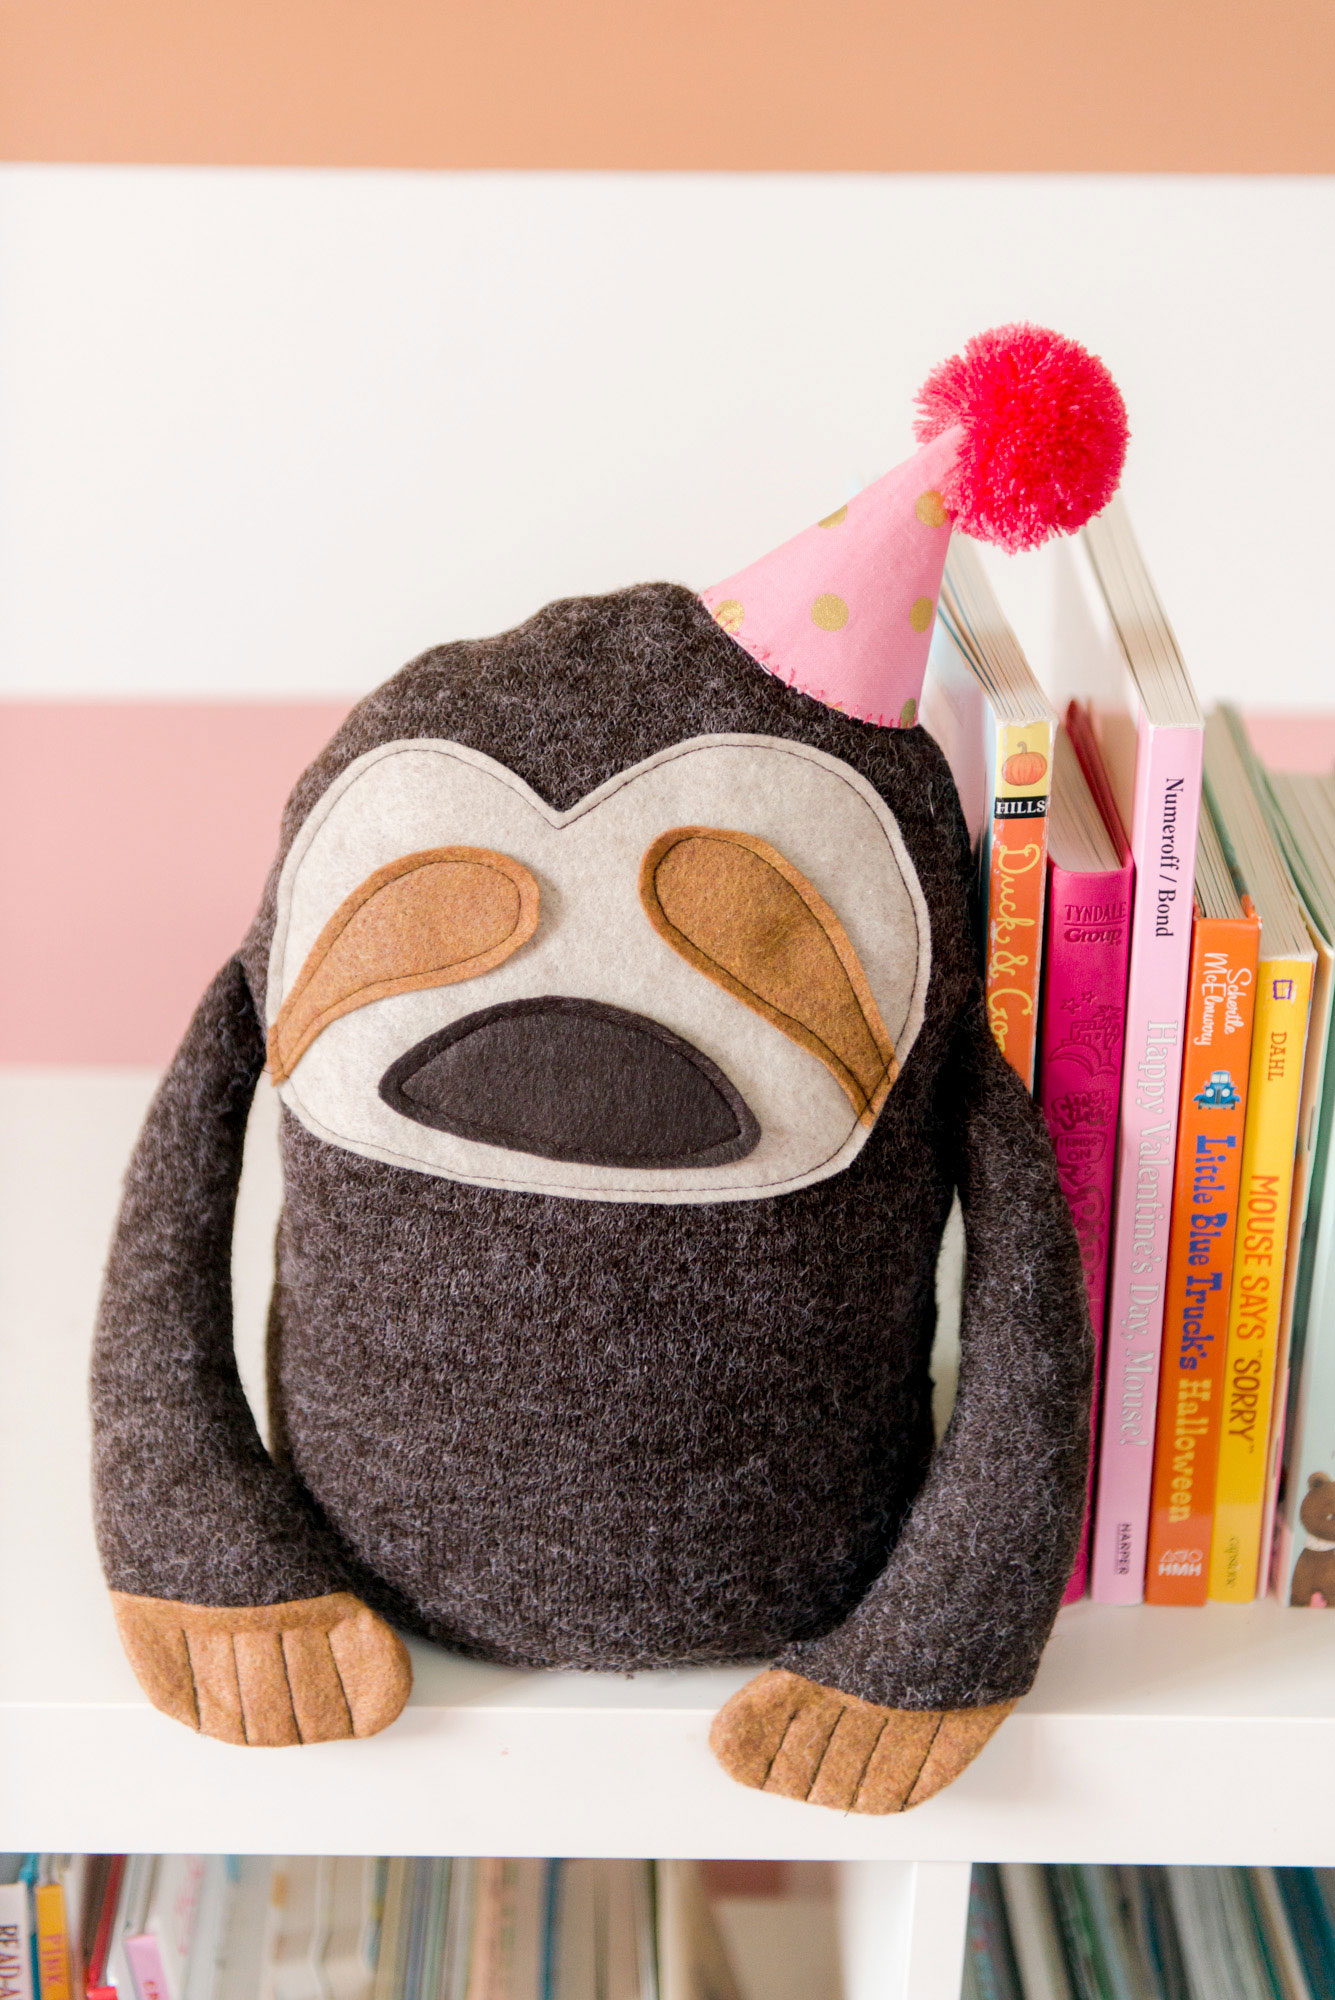 How to make the cutest sloth plush bookend or doorstop!